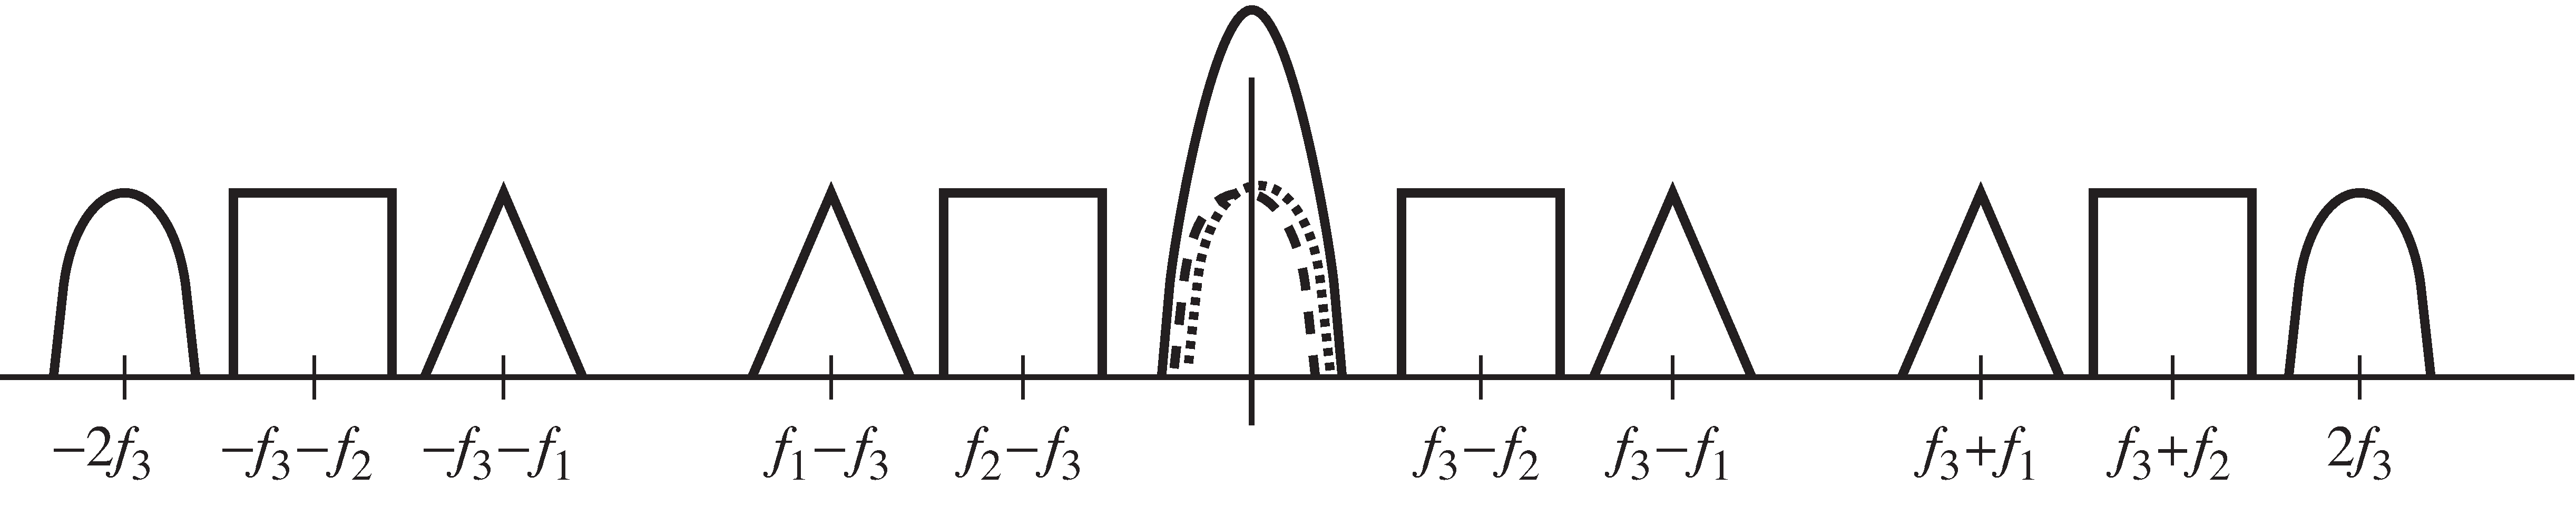 The signal containing the three messages of Figure 3 is modulated by a sinusoid of frequency f_3. This translates all three spectra by ±f_3, placing two identical semicircular spectra at the origin. These overlapping spectra, shown as dashed lines, sum to form the larger solid semicircle. Applying a LPF isolates just this one message.